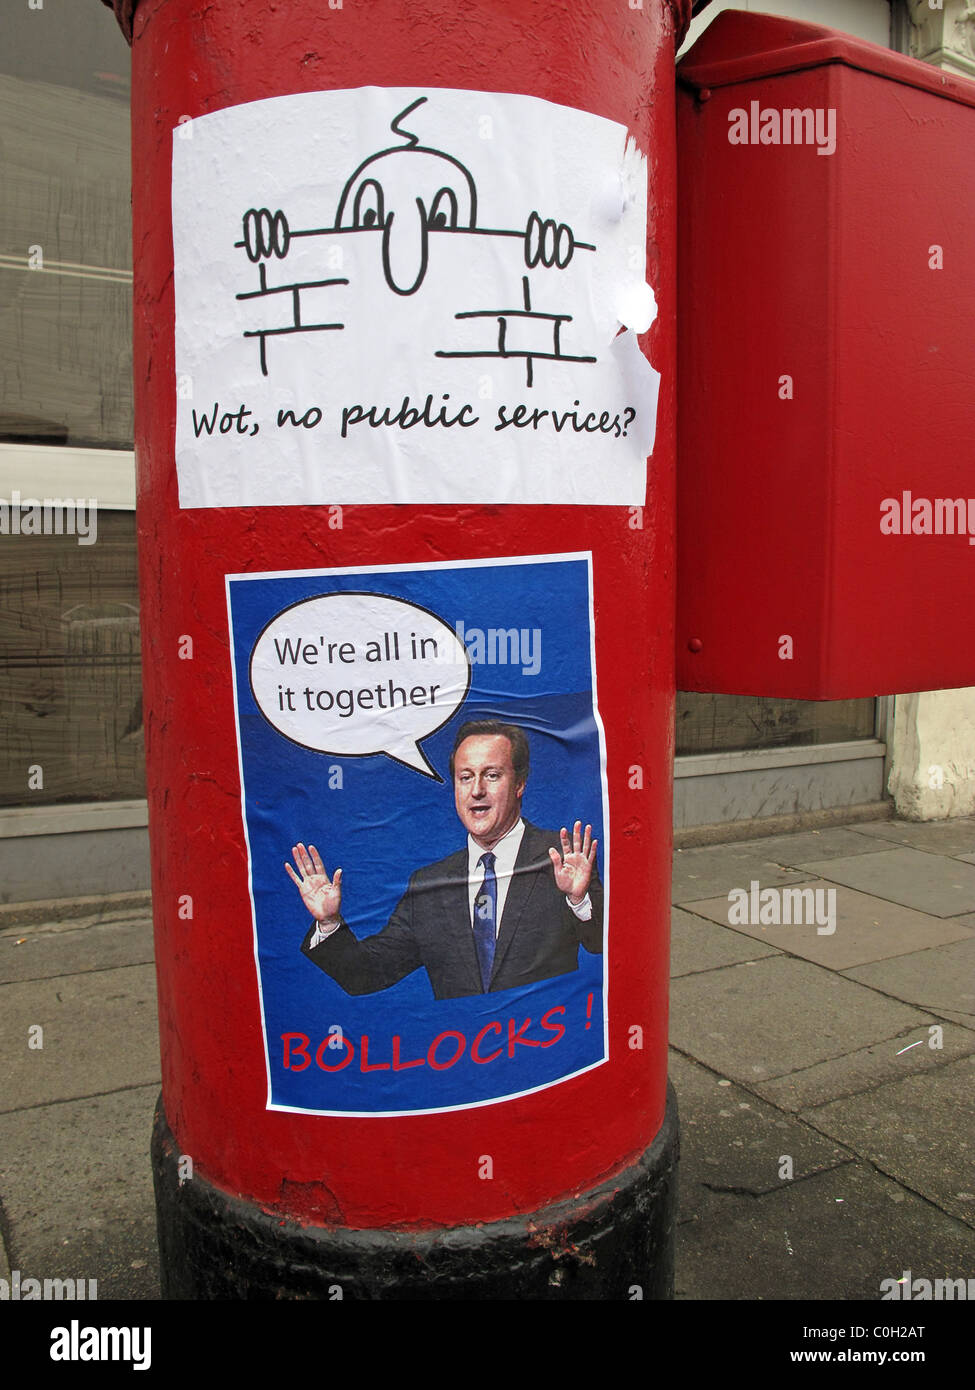 David Cameron Big Society 'We're all in it together' public services posters Stock Photo